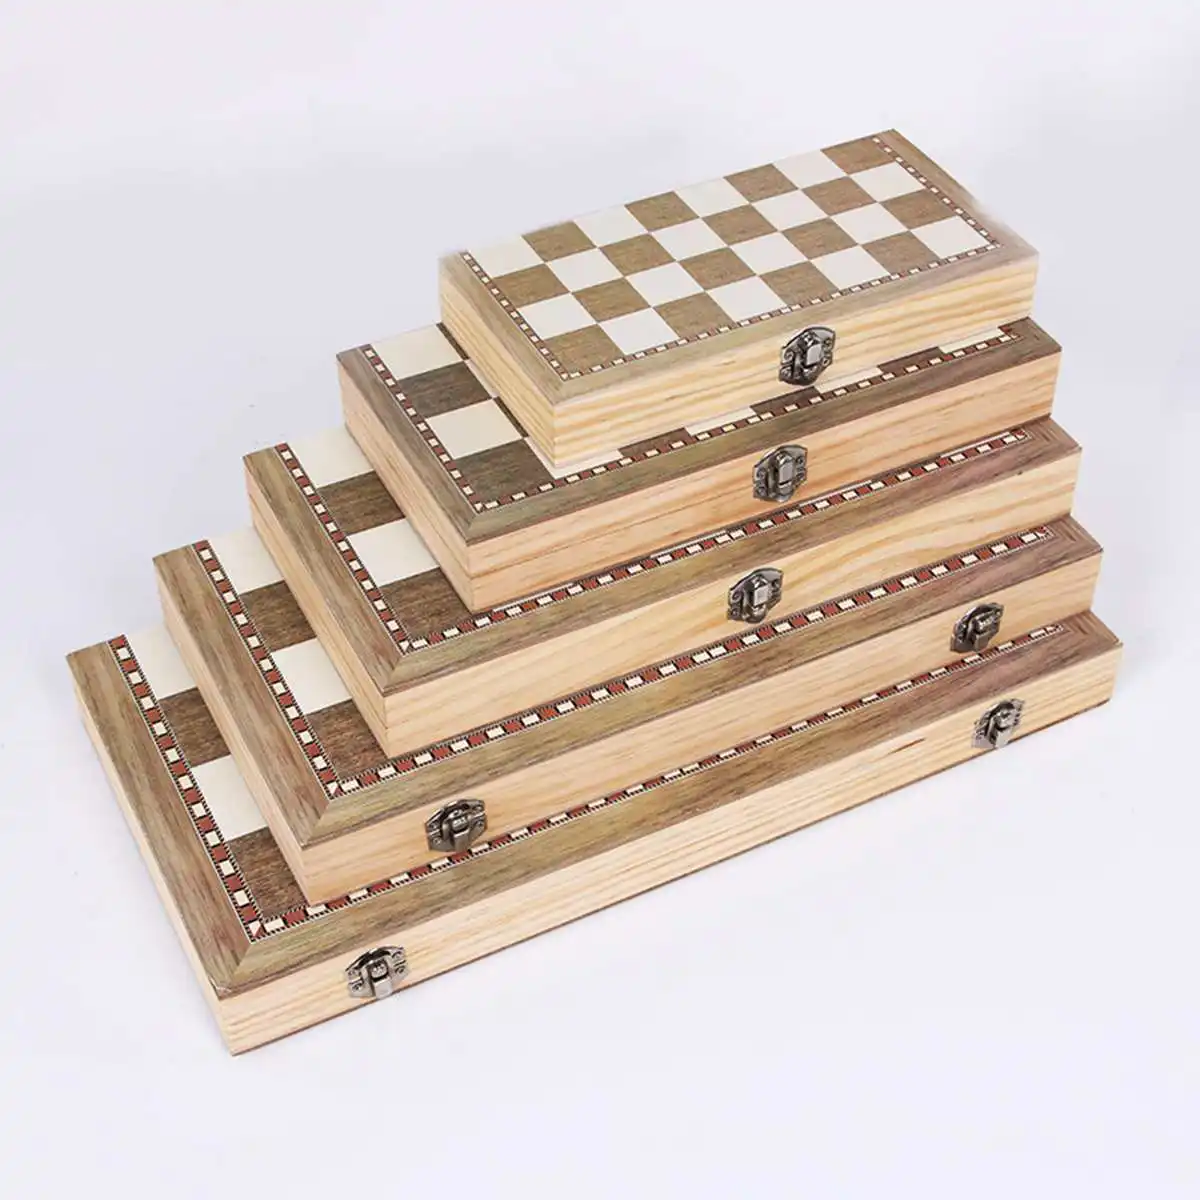 Board game toy kit gift foldable wooden chess set travel game chess backgammon checkers toy children chess entertainment 1